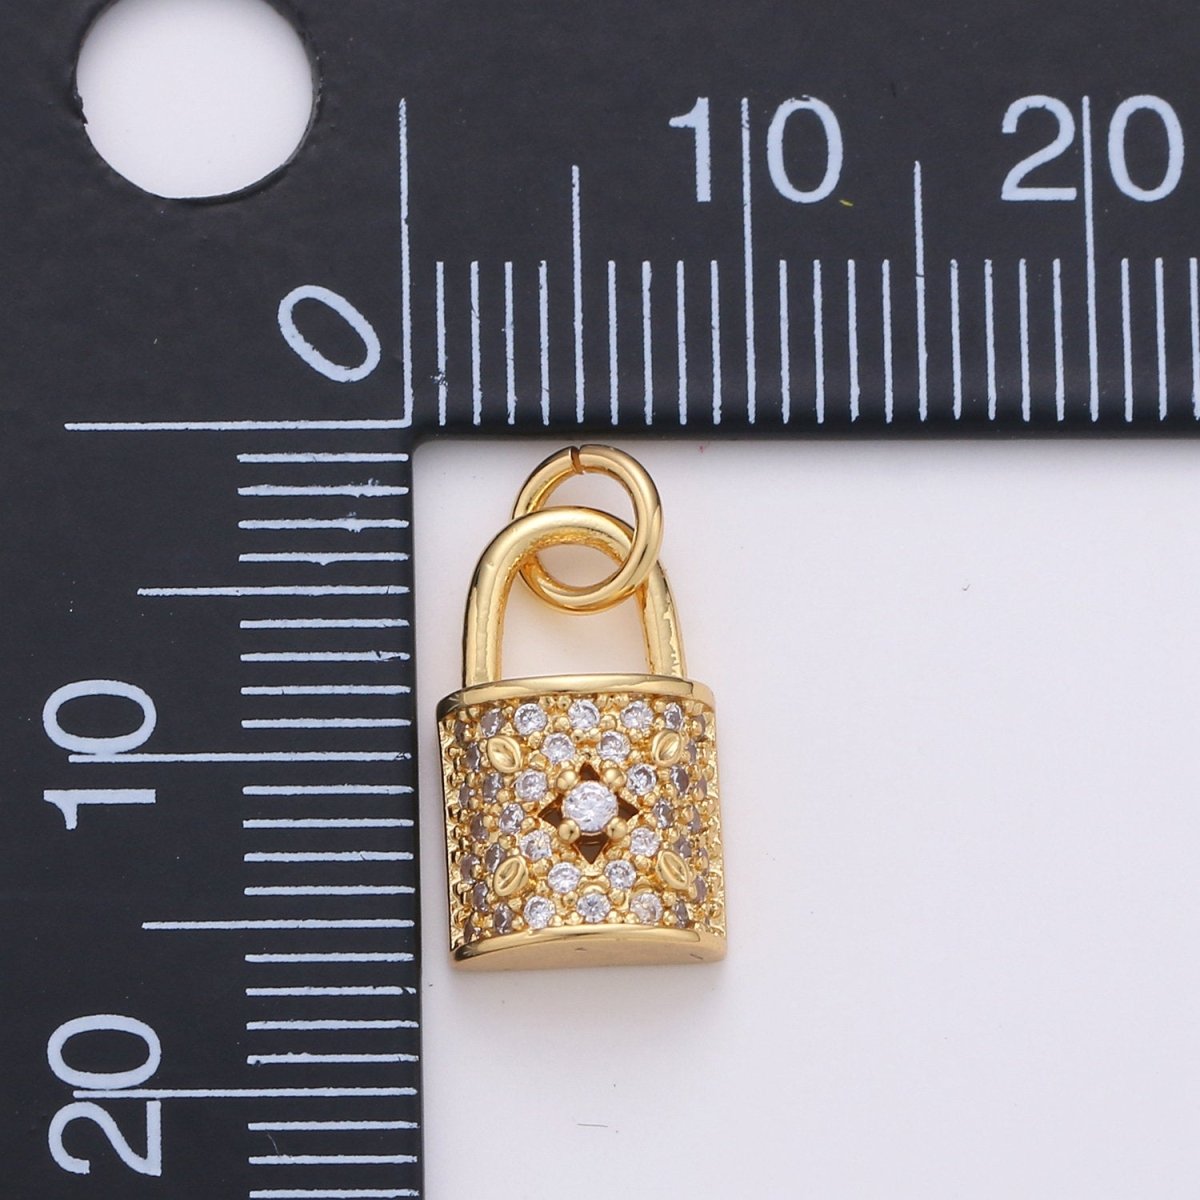 Dainty Gold Micro Pave Lock charm for Jewelry making, Minimalist Padlock charm for Bracelet Necklace Earring Component Silver Padlock Charm, D-061 D-062 - DLUXCA